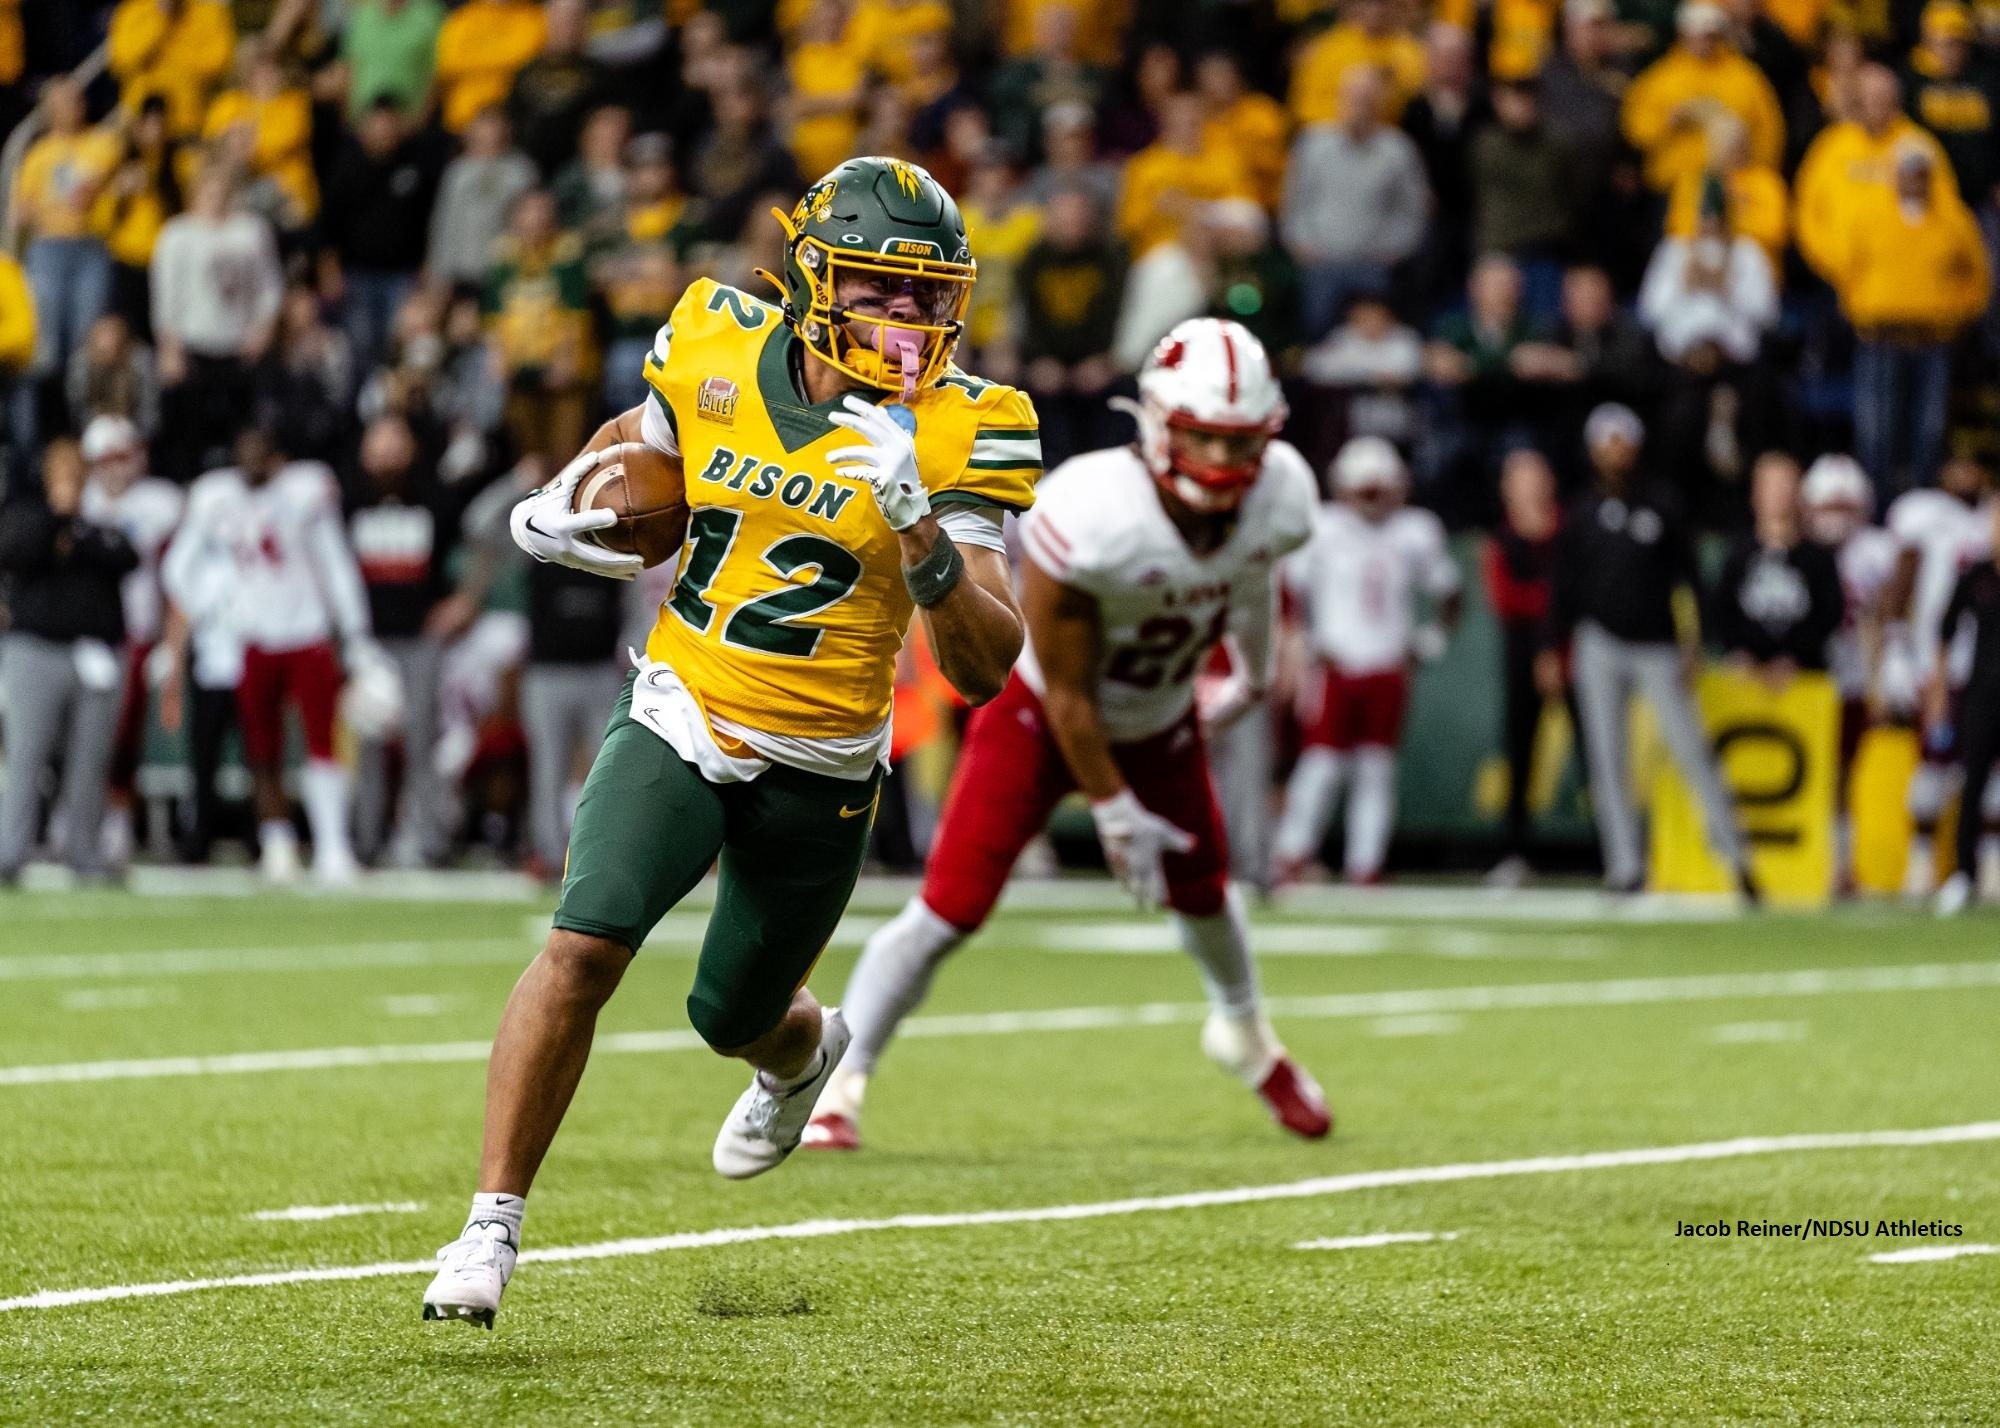 Rating 10 Potential Freak-Out Factors Among Some of the Higher-Ranked FCS Teams